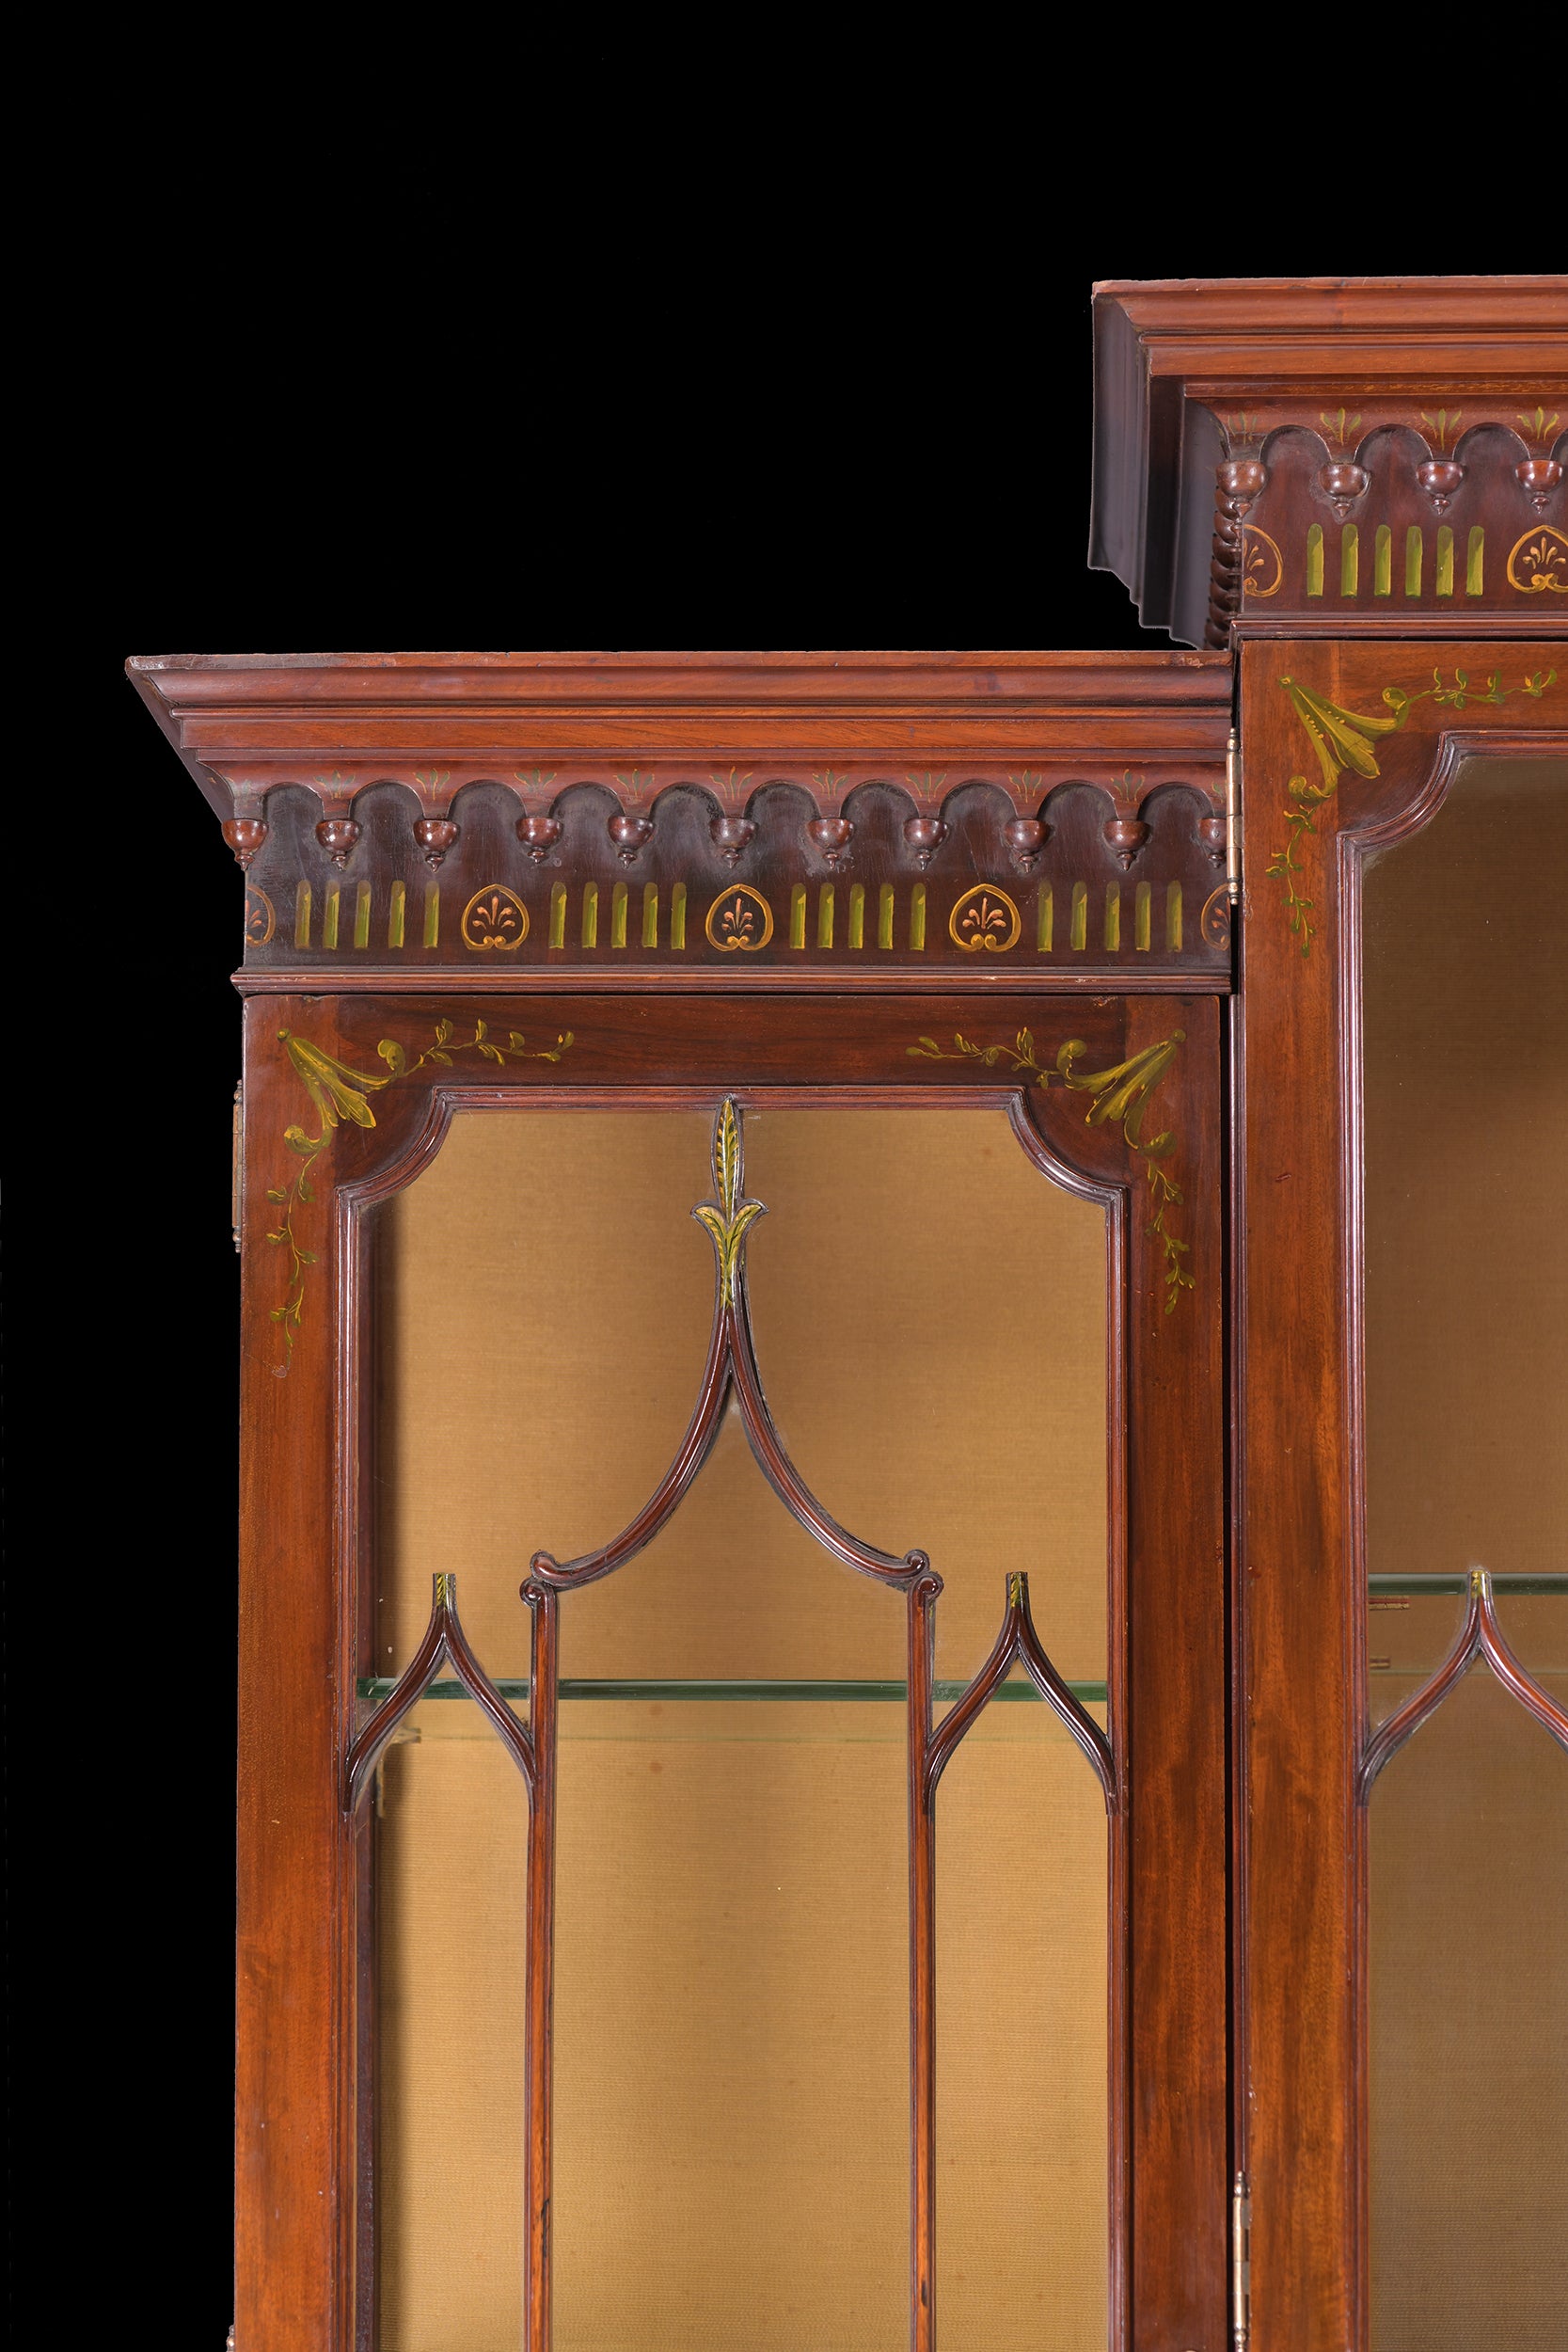 NEO-CLASSICAL STYLE DISPLAY CABINET - REF No. 4063